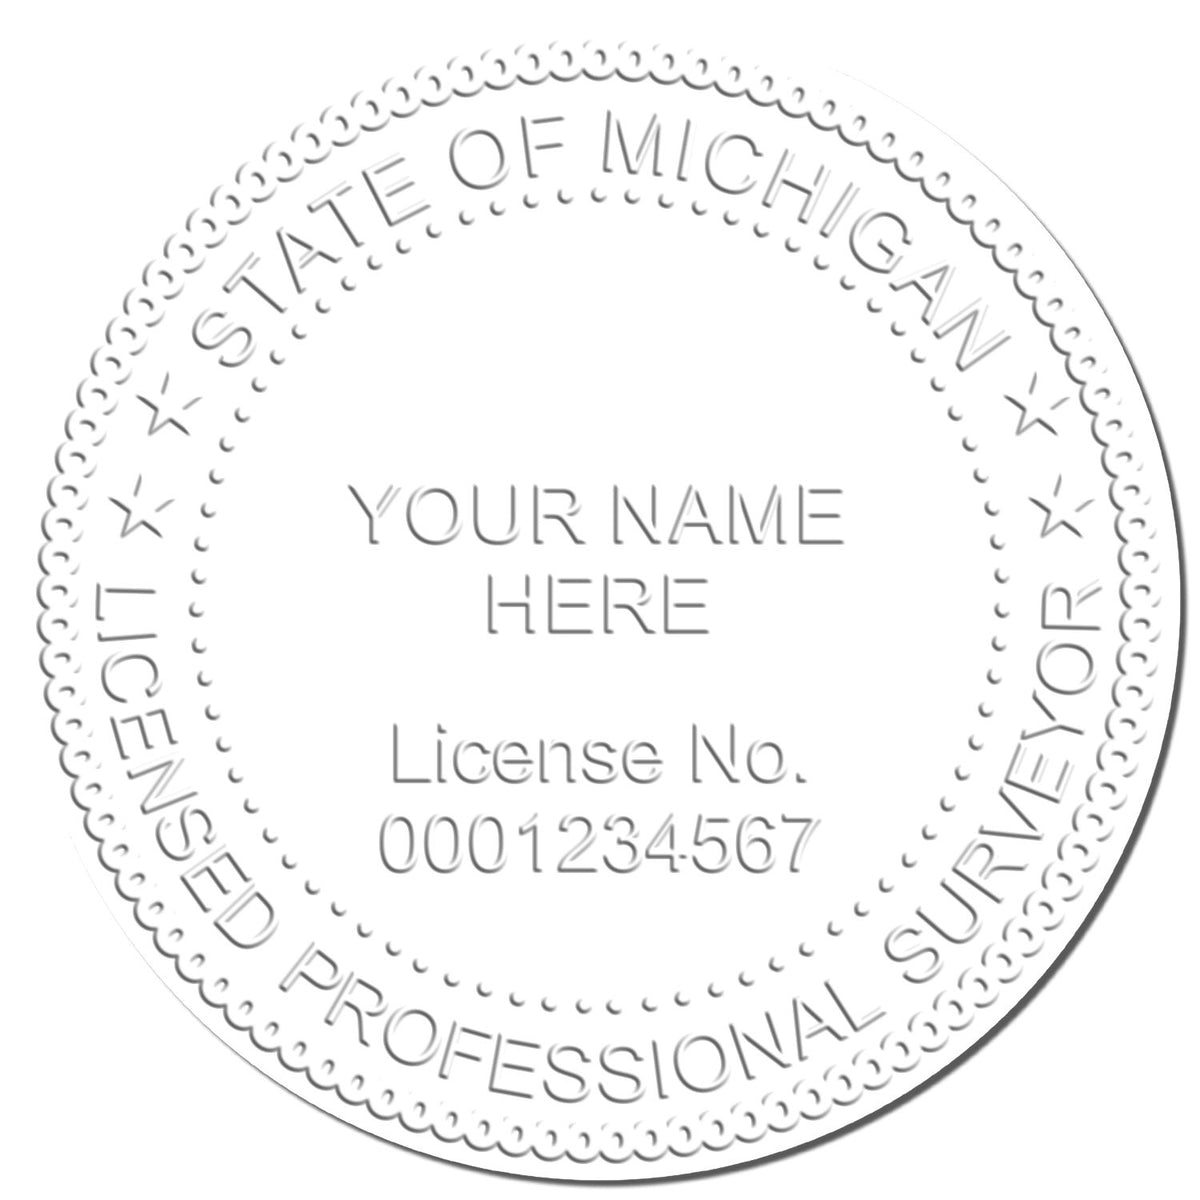 This paper is stamped with a sample imprint of the Handheld Michigan Land Surveyor Seal, signifying its quality and reliability.